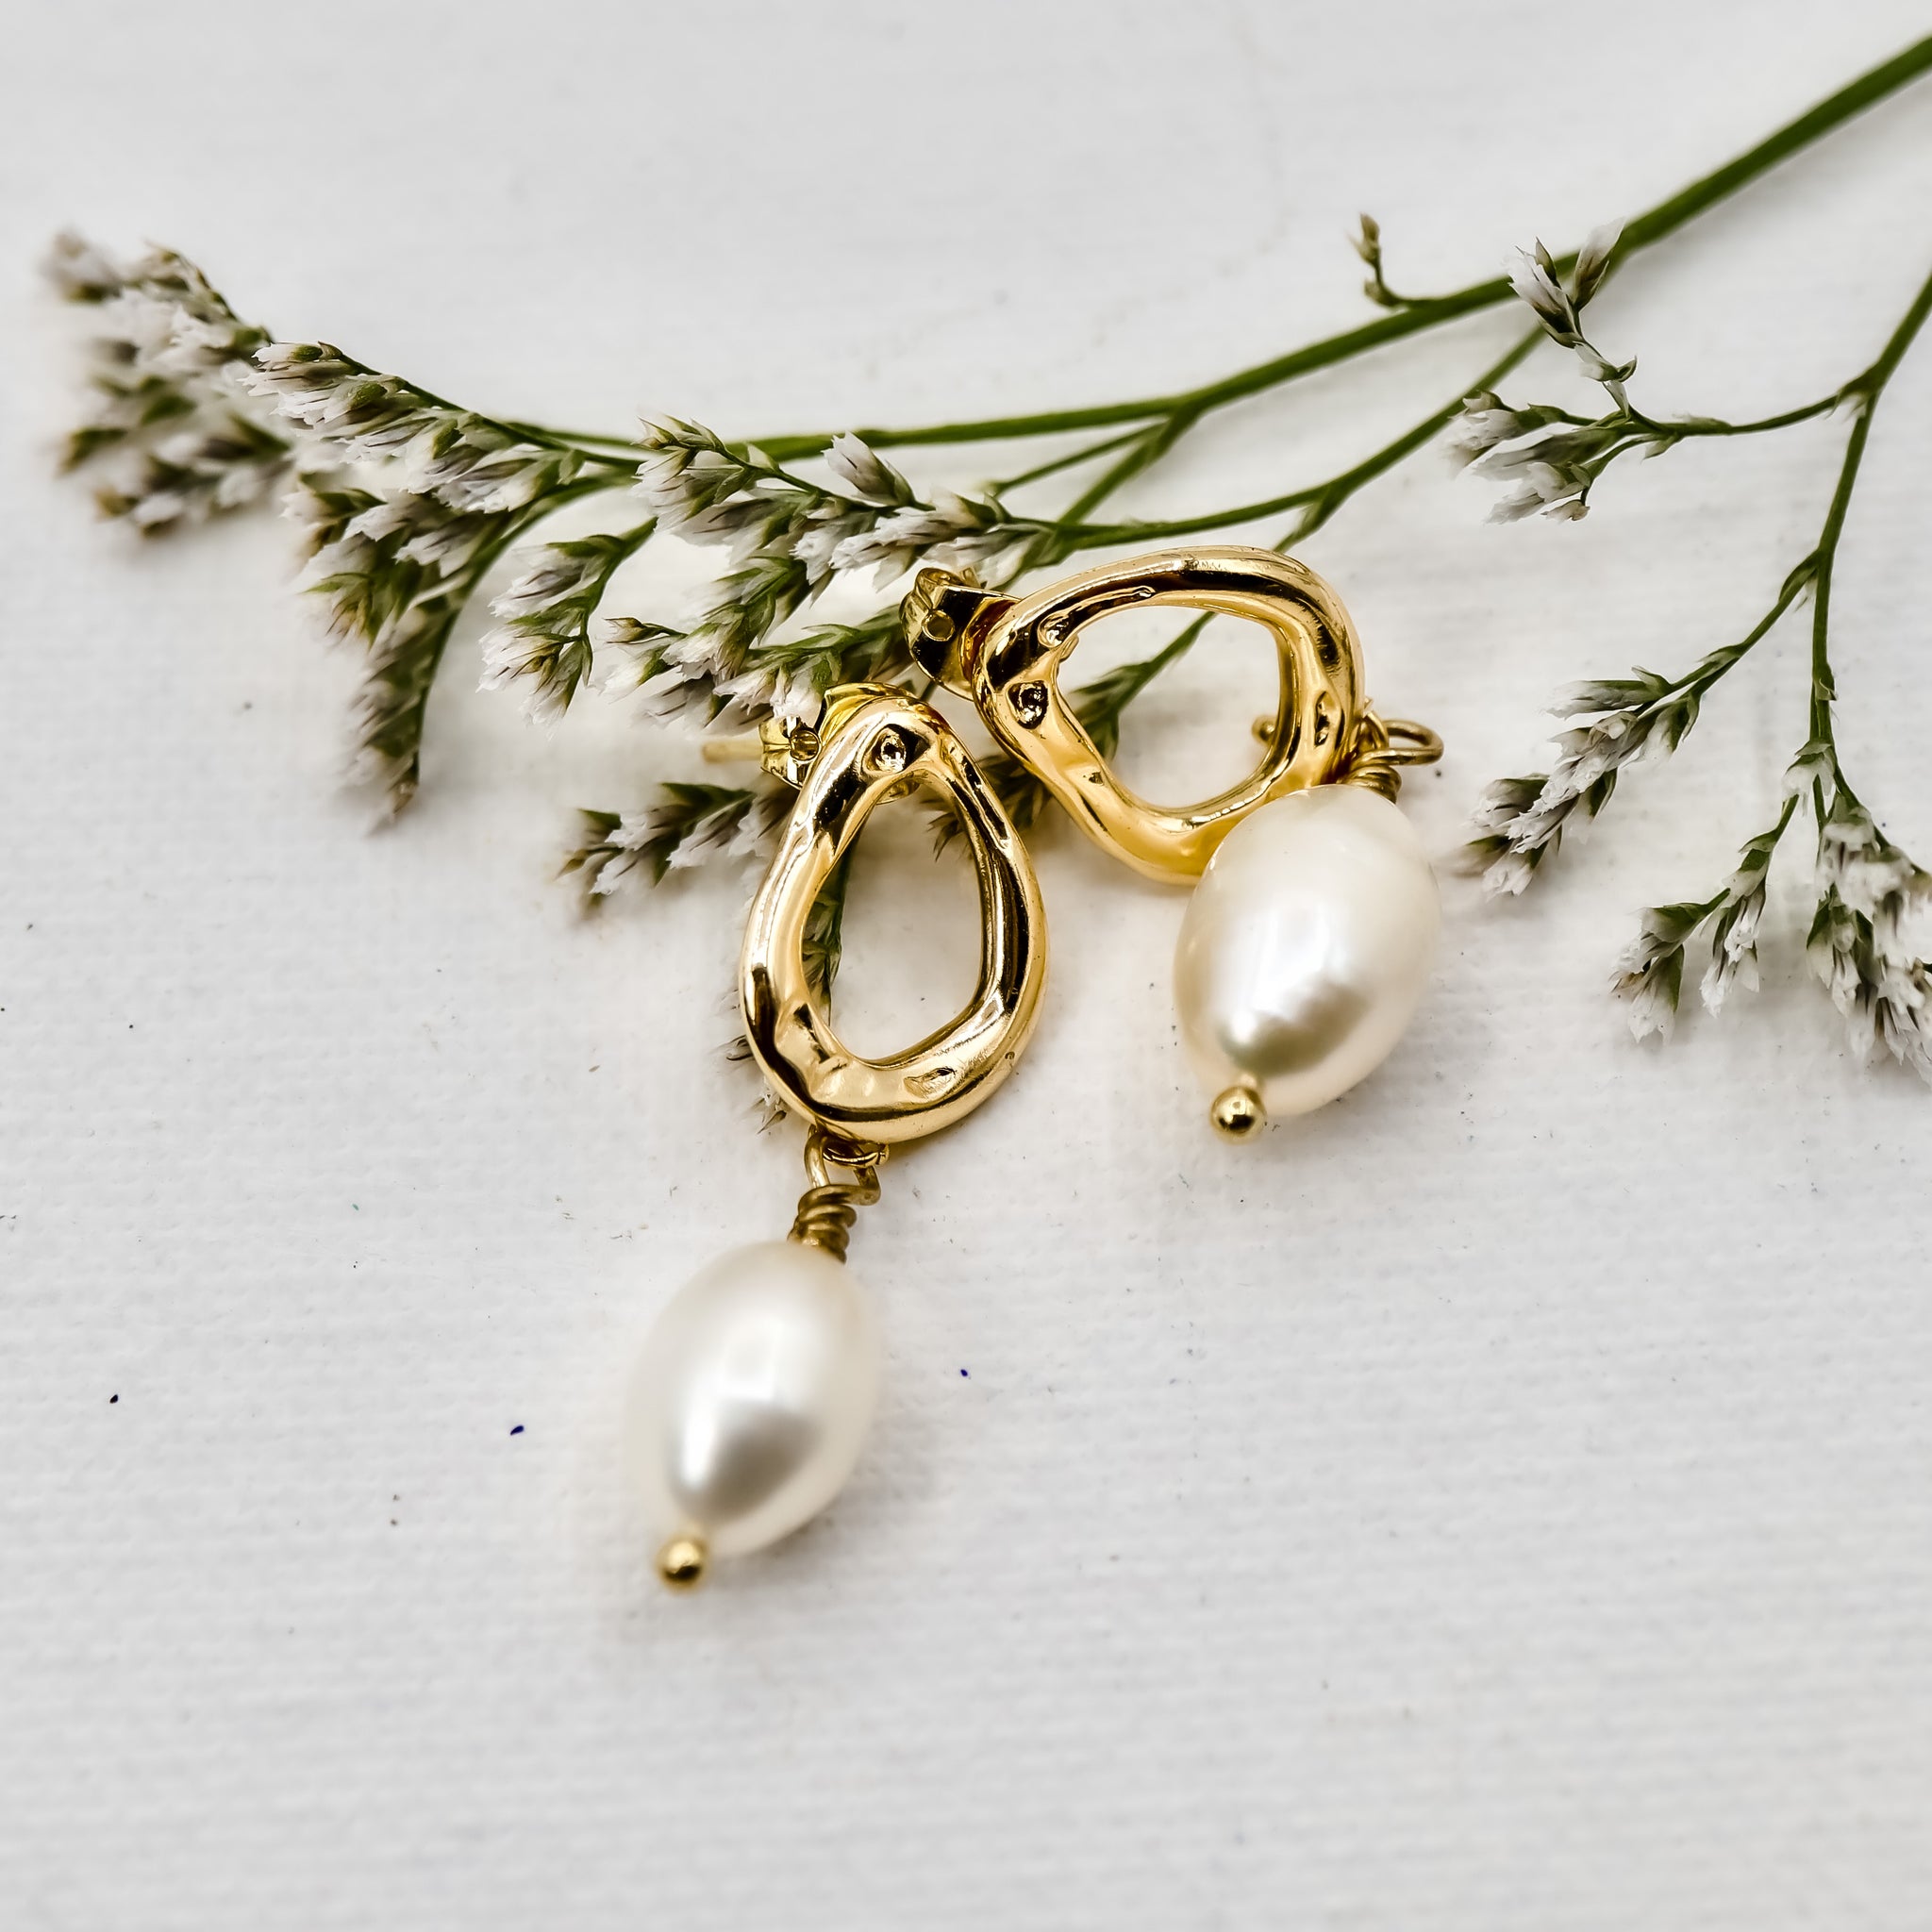 Halo Earrings with Freshwater Pearls 18k Gold-plated